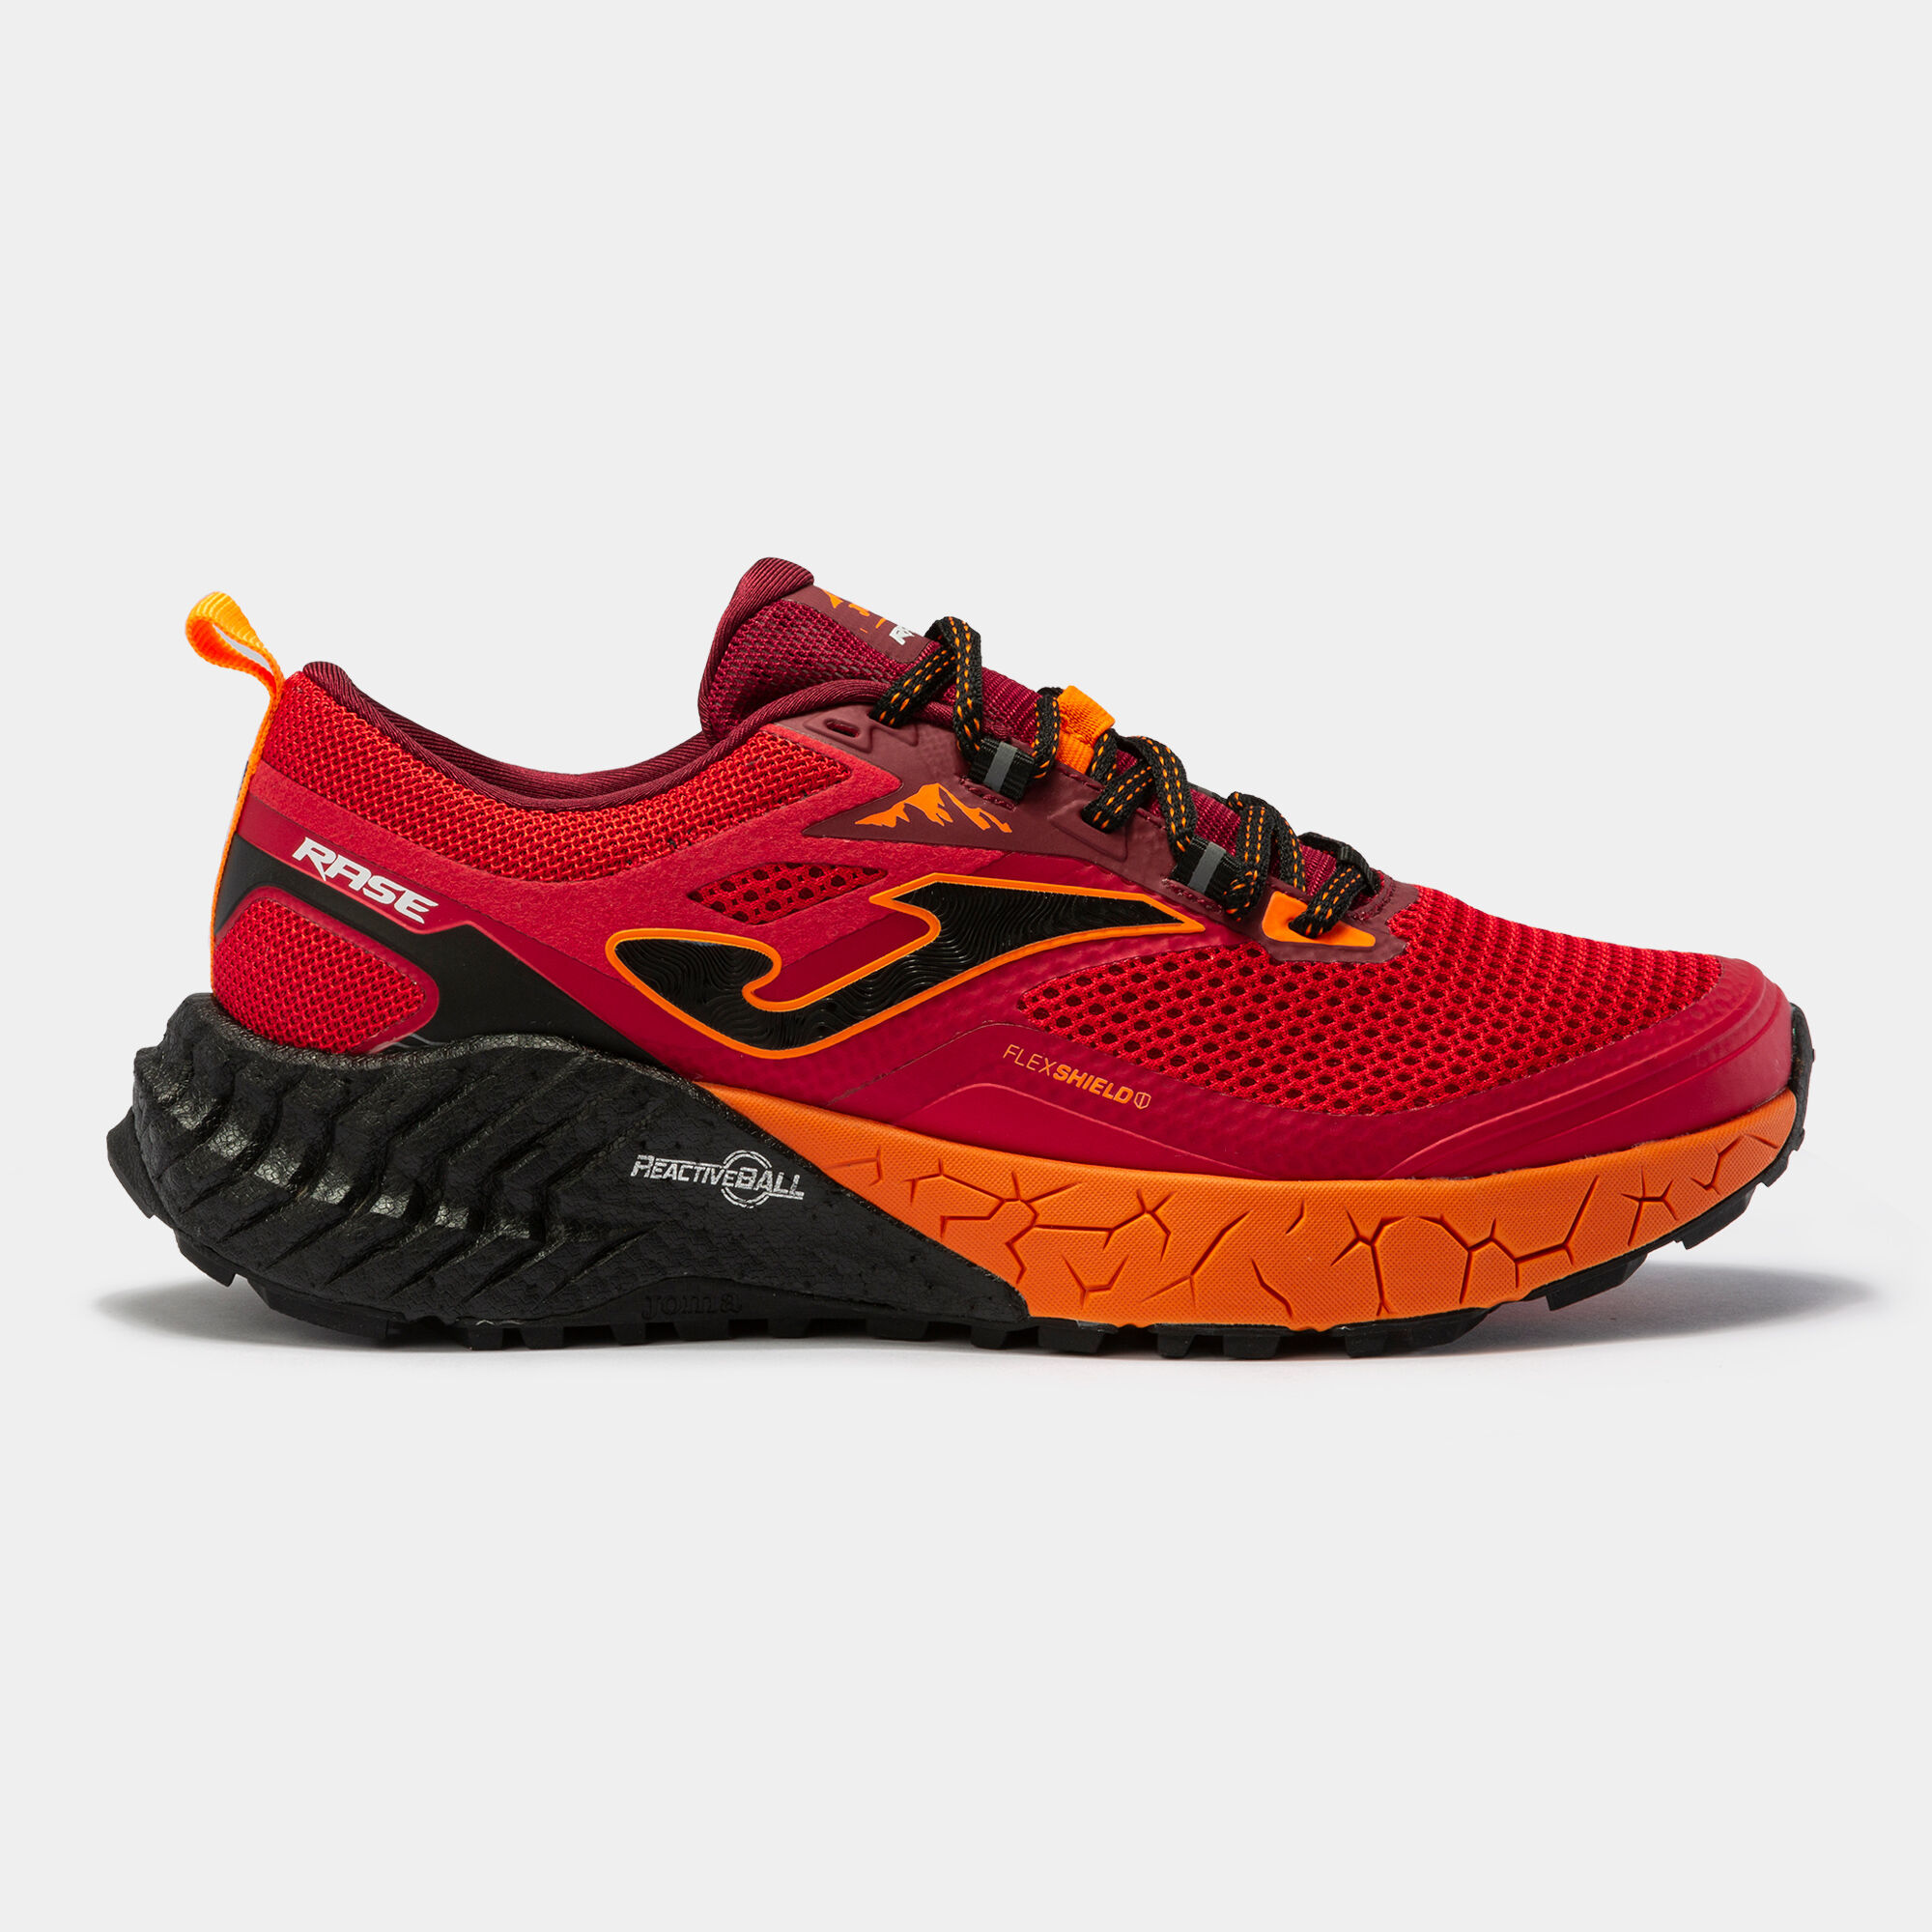 CHAUSSURES TRAIL RUNNING RASE 22 HOMME ROUGE ORANGE